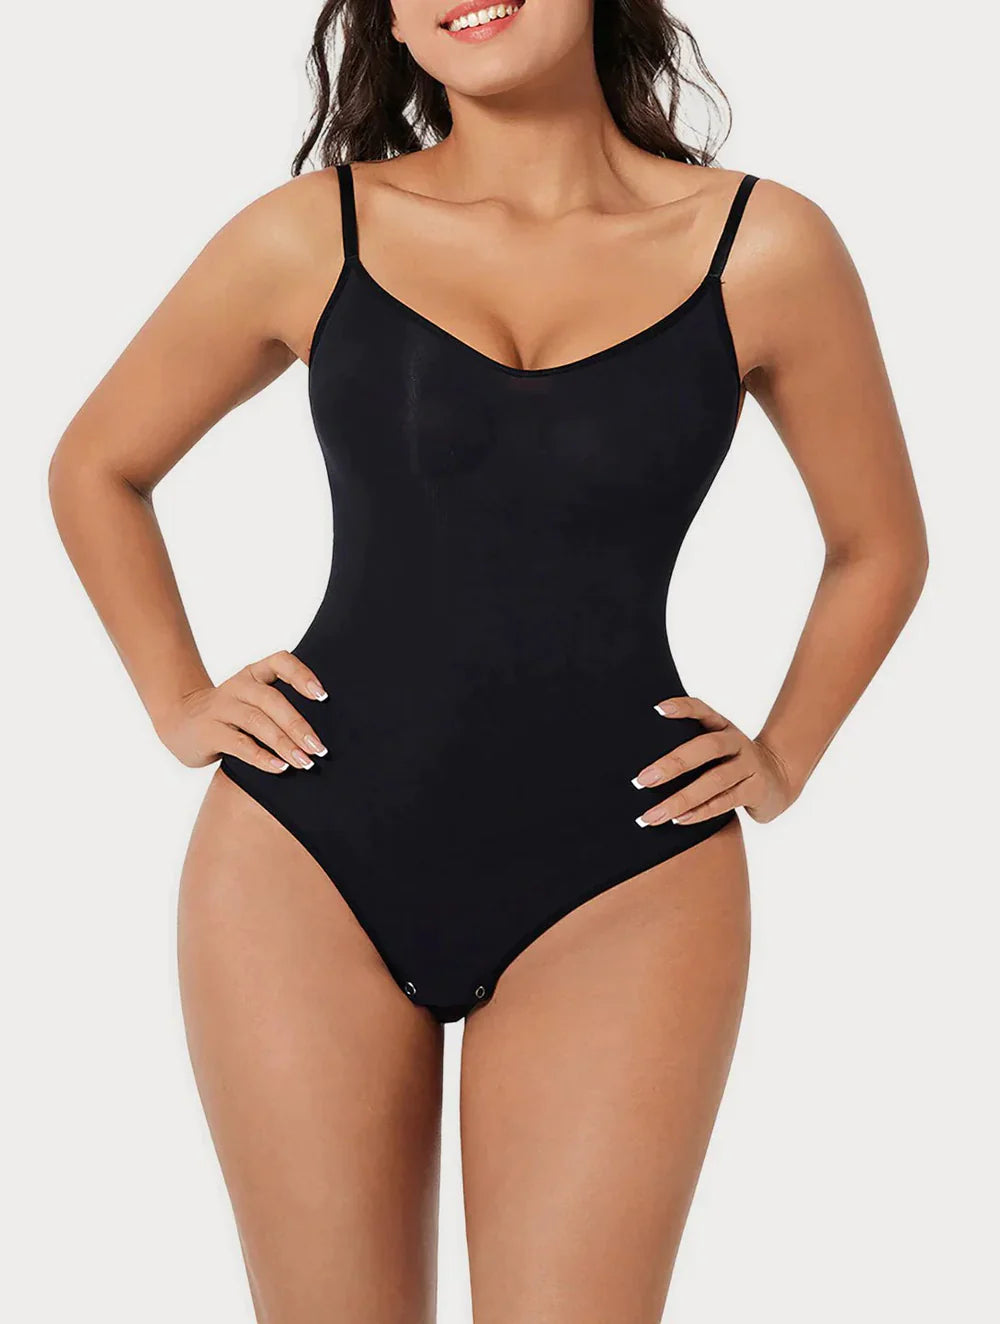 Slim Firm Tummy Compression Bodysuit Shaper with Butt Lifter